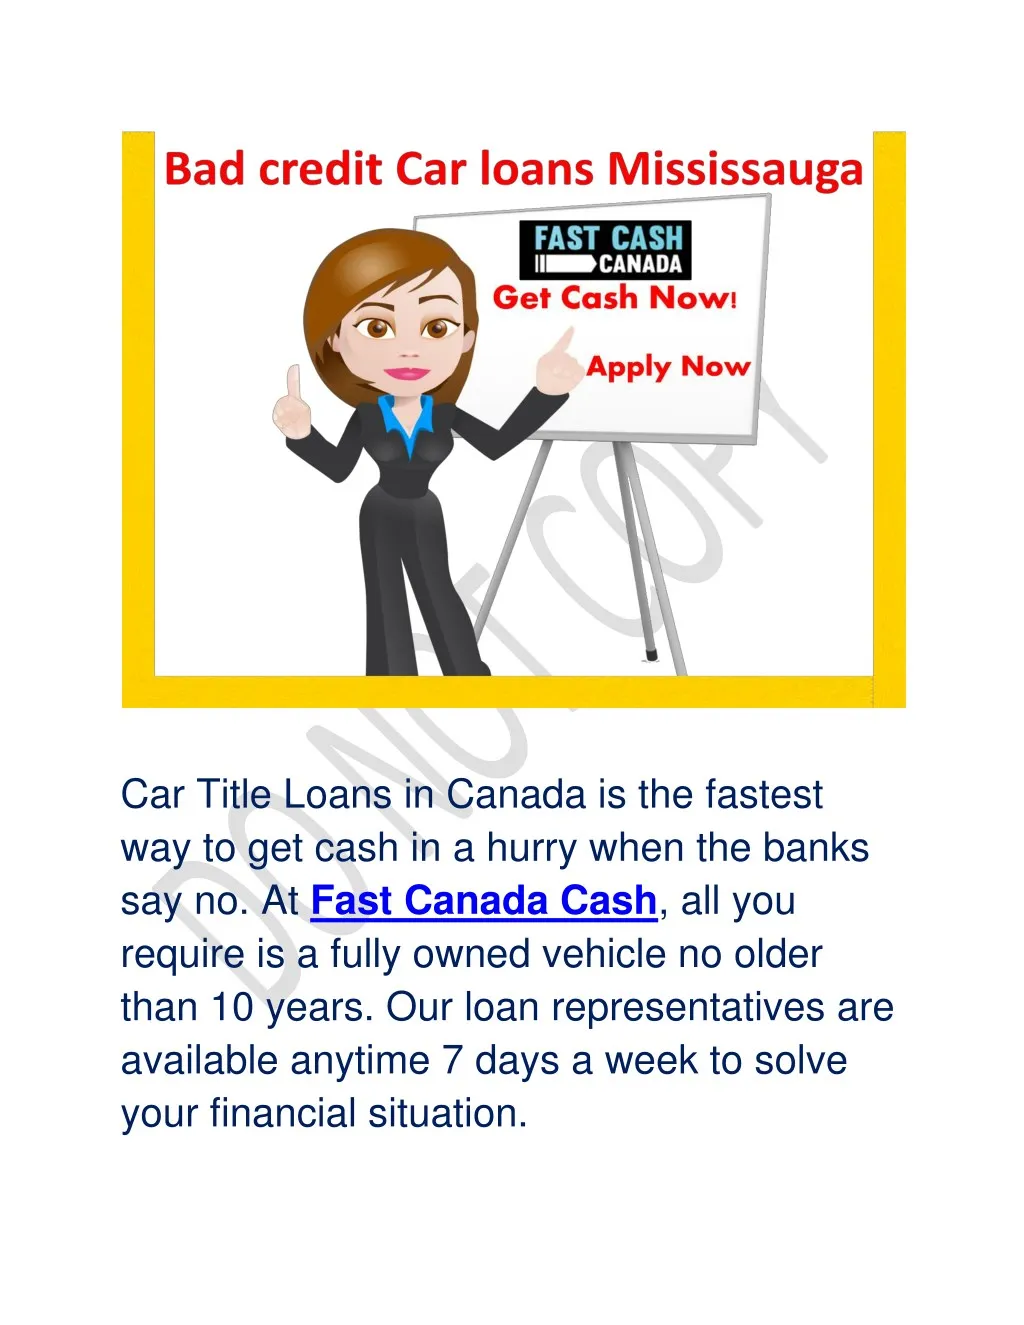 car title loans in canada is the fastest